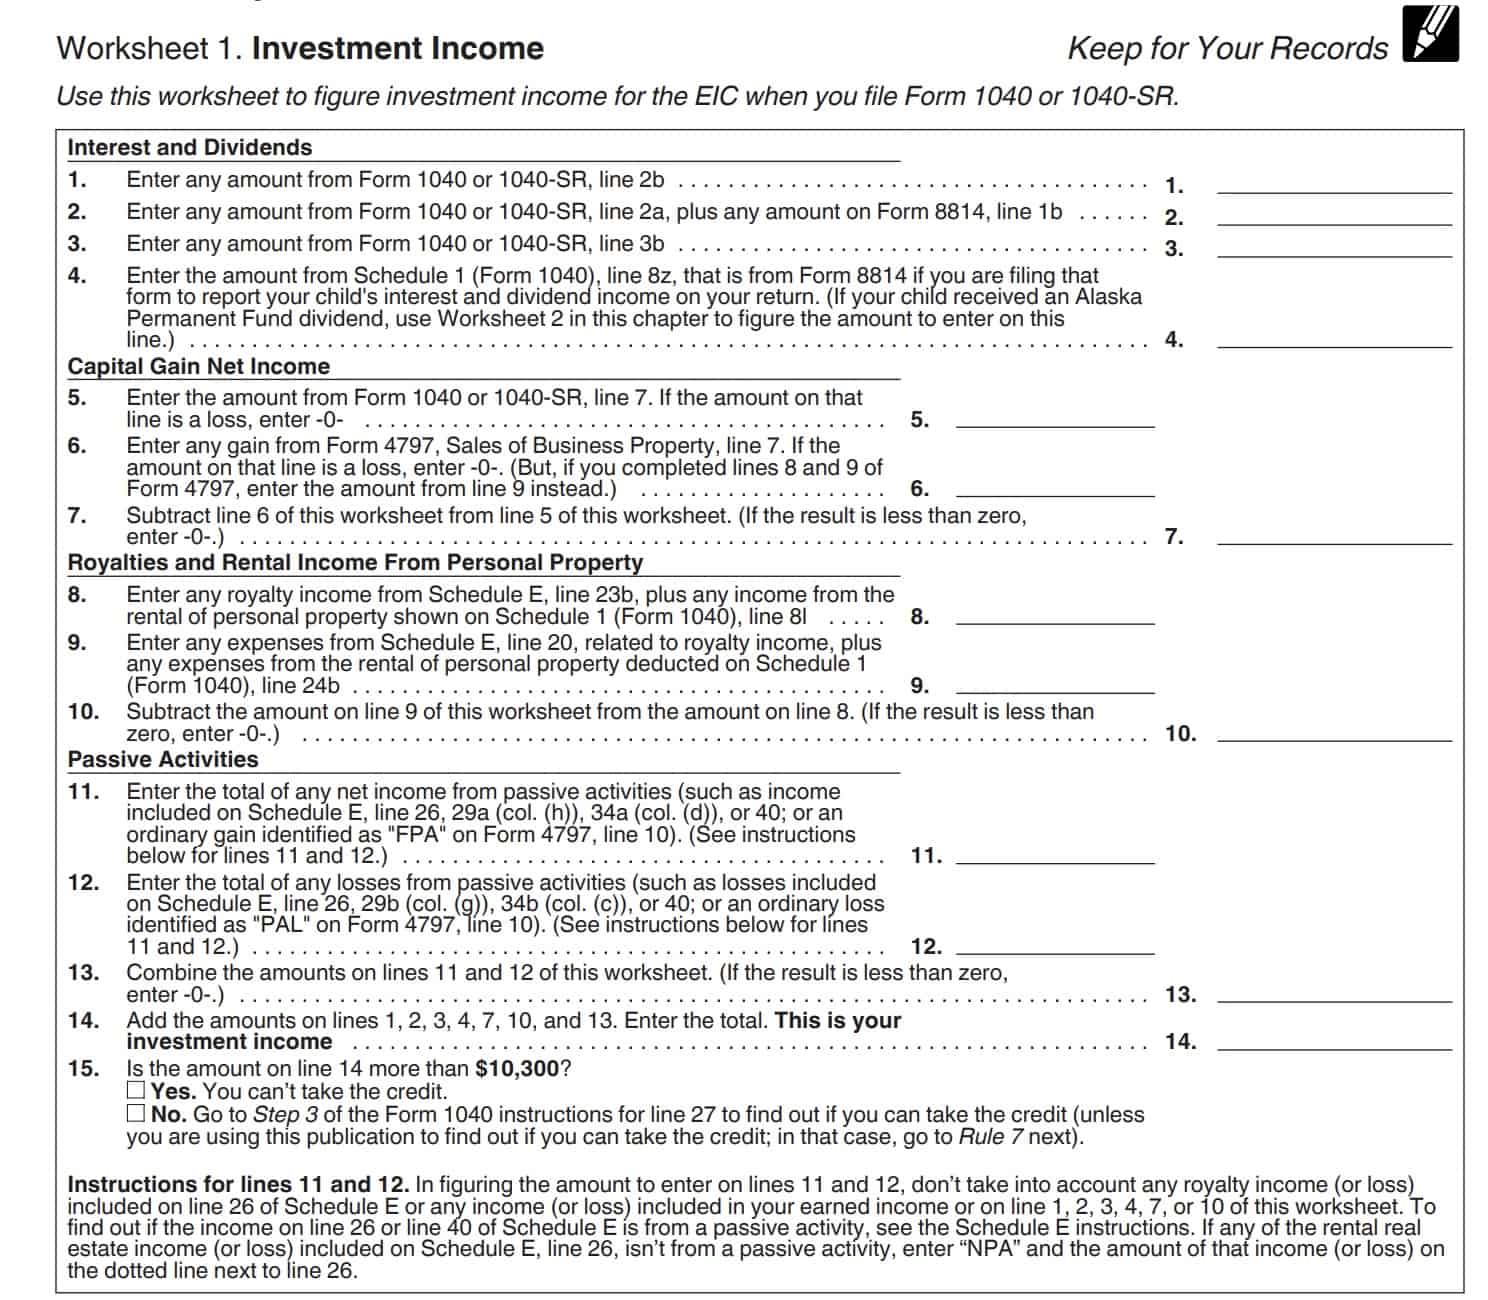 investment income worksheet for EITC purposes